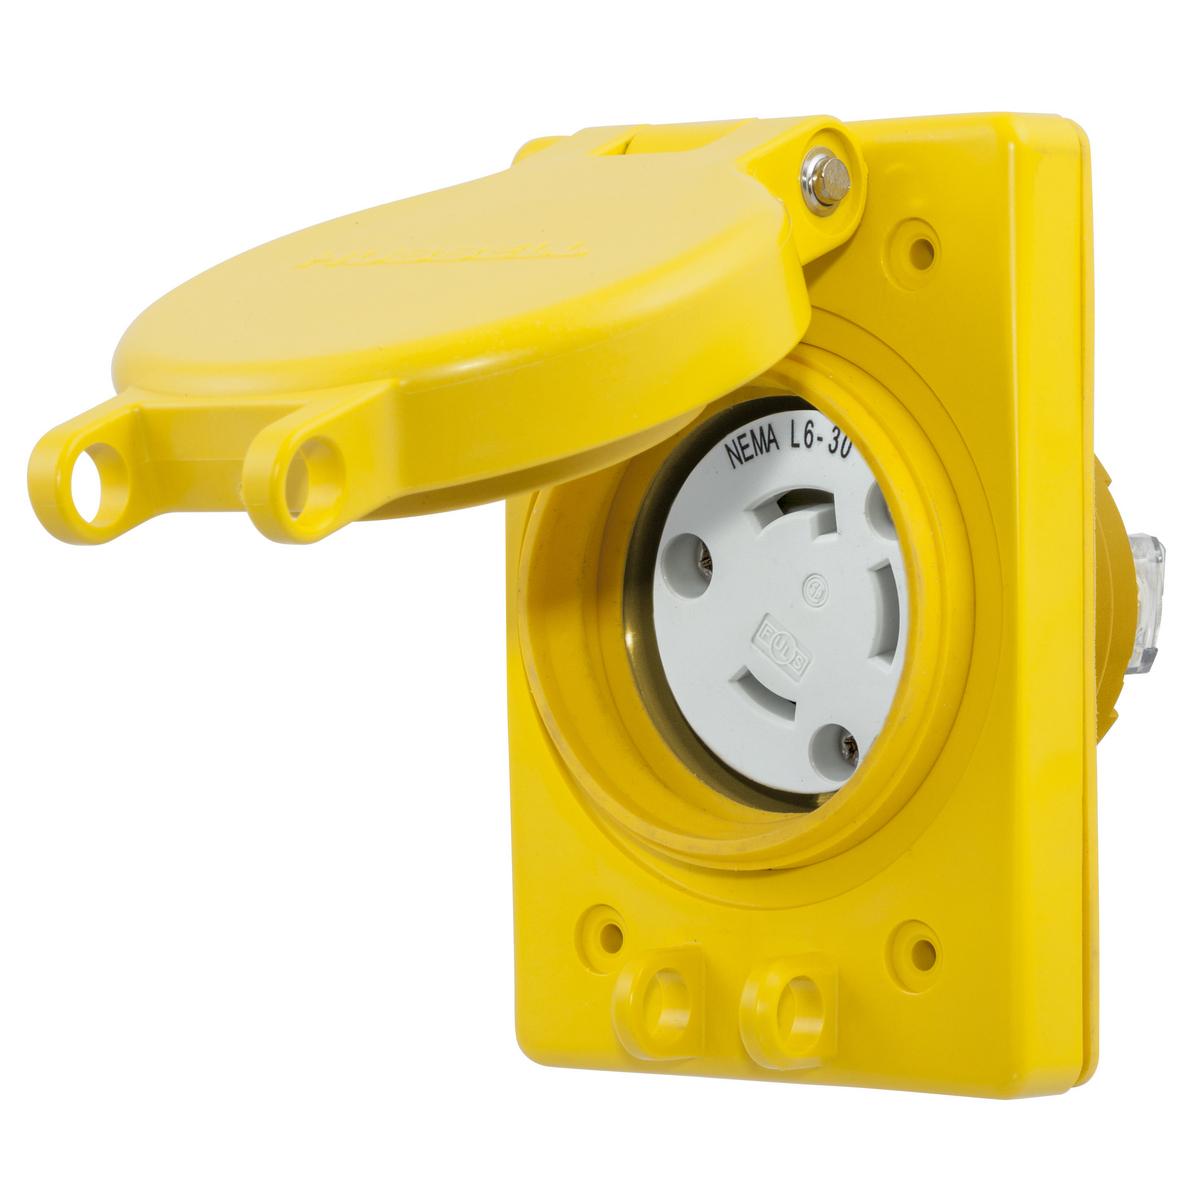 Hubbell HBL69W48 Watertight Devices, Twist-Lock® Receptacle with Lift Cover, 30A, 250V, 2 Pole, 3 Wire, Thermoplastic elastomer, NEMA L6-30R, Yellow  ; Impact resistant PBT lid, cover plate, and receptacle body ; Thermoplastic elastomer seal ; Stainless steel hardware and